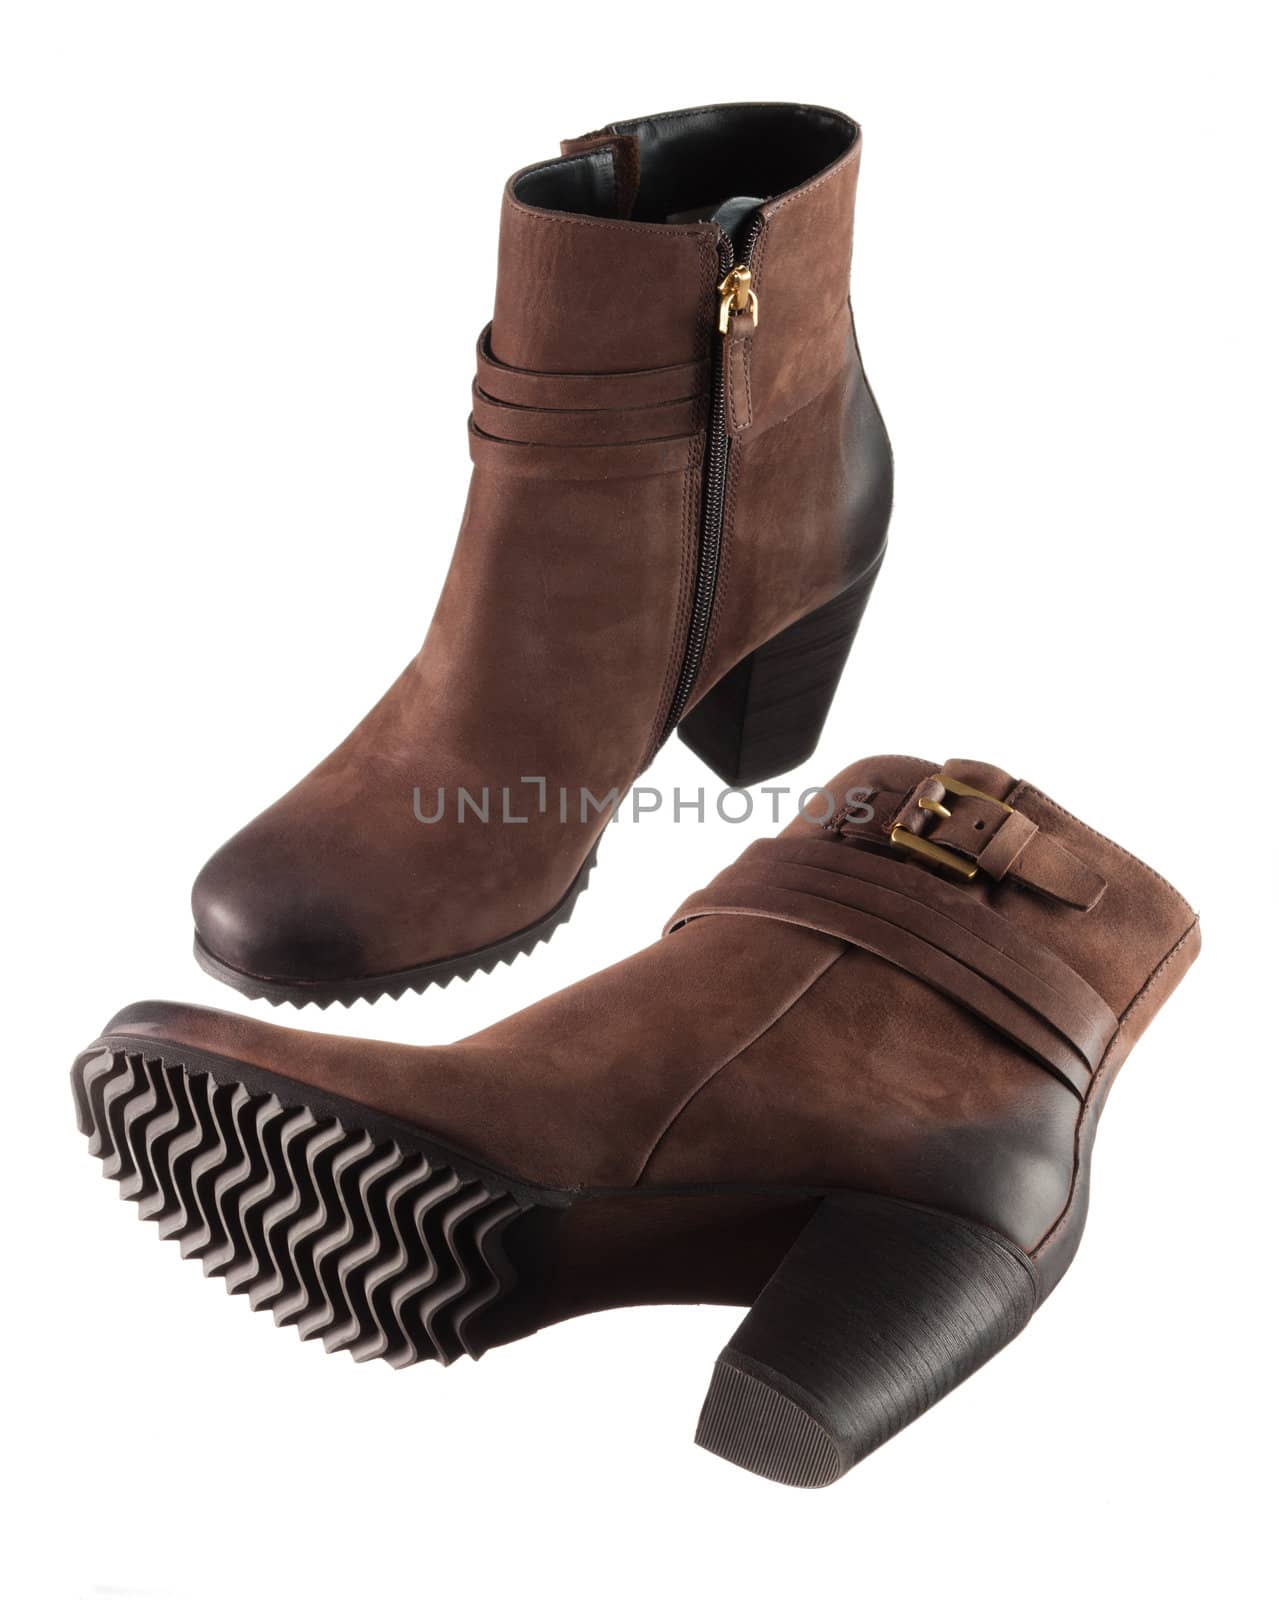 modern female ankle boots over white background